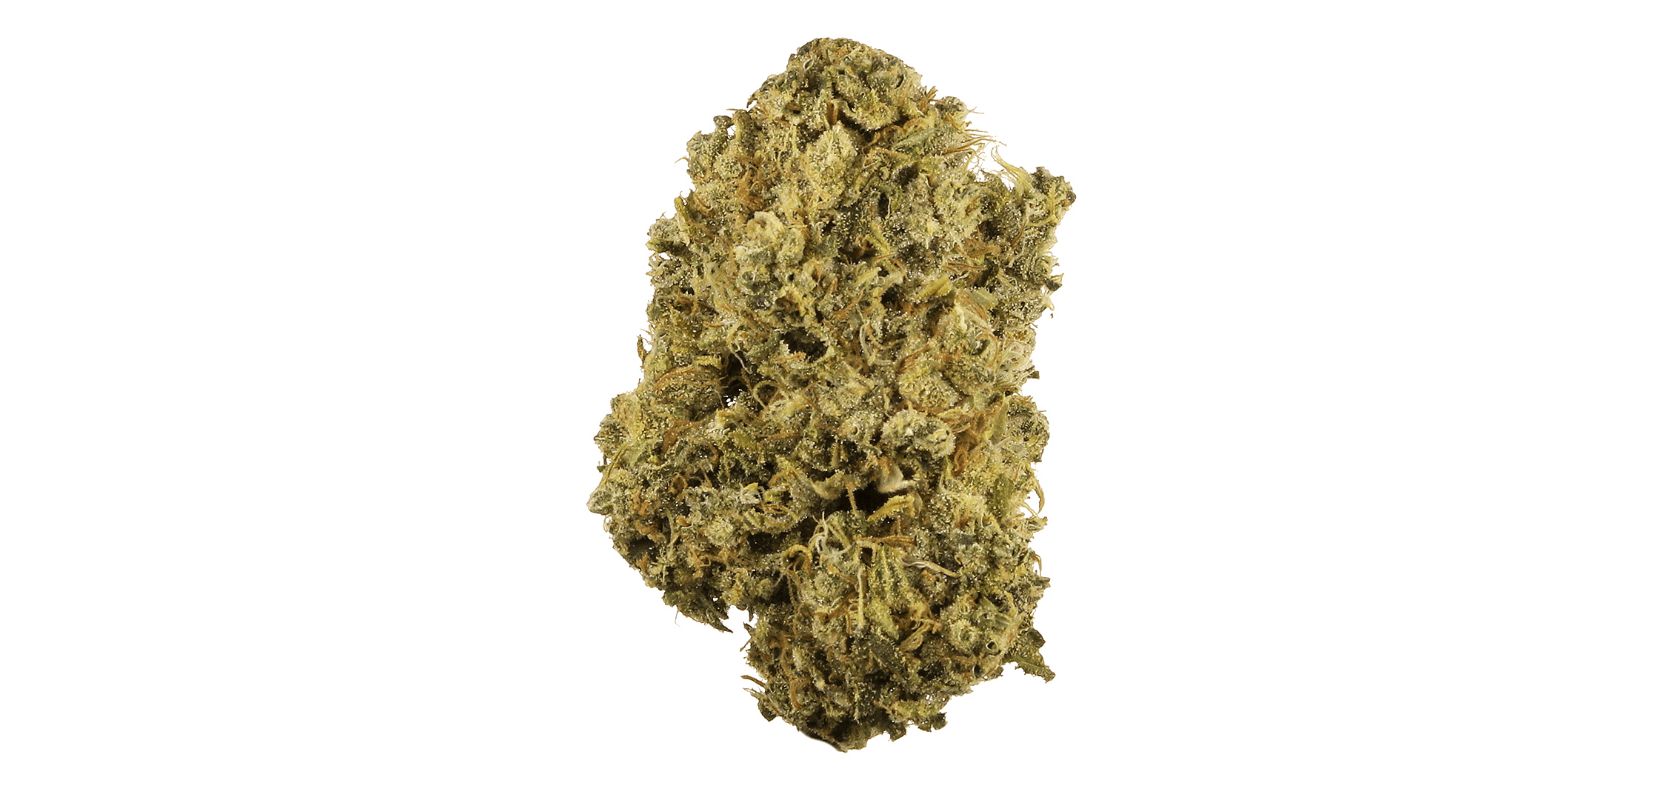 Durban Poison is a feminized pure sativa marijuana strain that has become many people’s favourite bud. If you’re looking for a strain you can smoke daily, Durban Poison is a strong contender. 